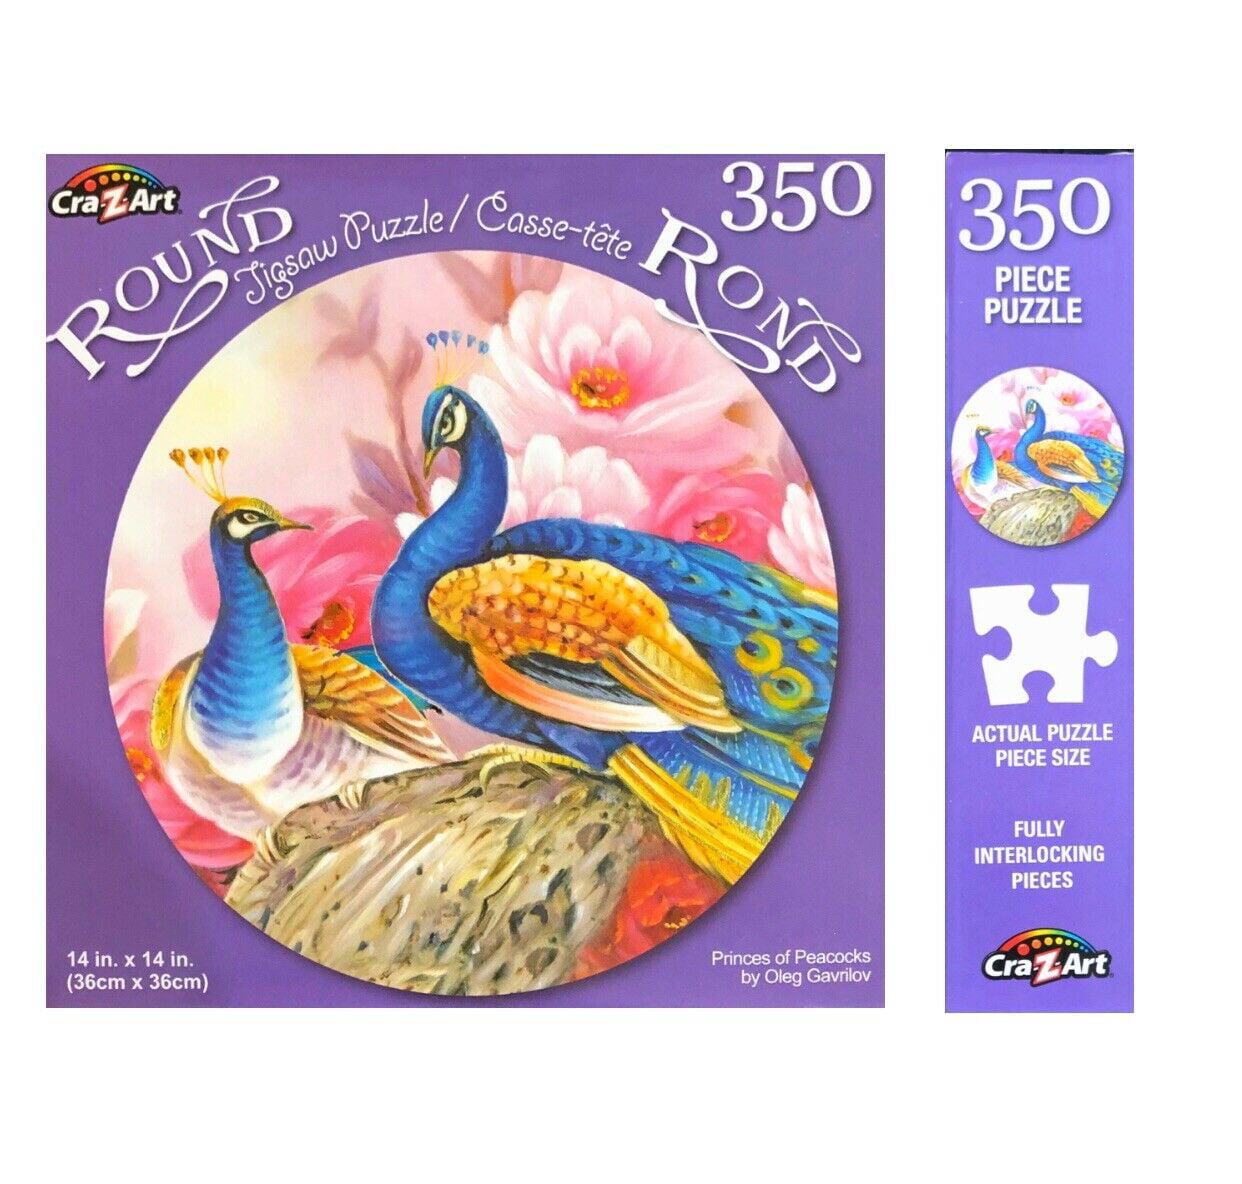 Lang Christmas Morning Die Cut Puzzle 500 piece Steward Sherwood 2009 New Sealed 